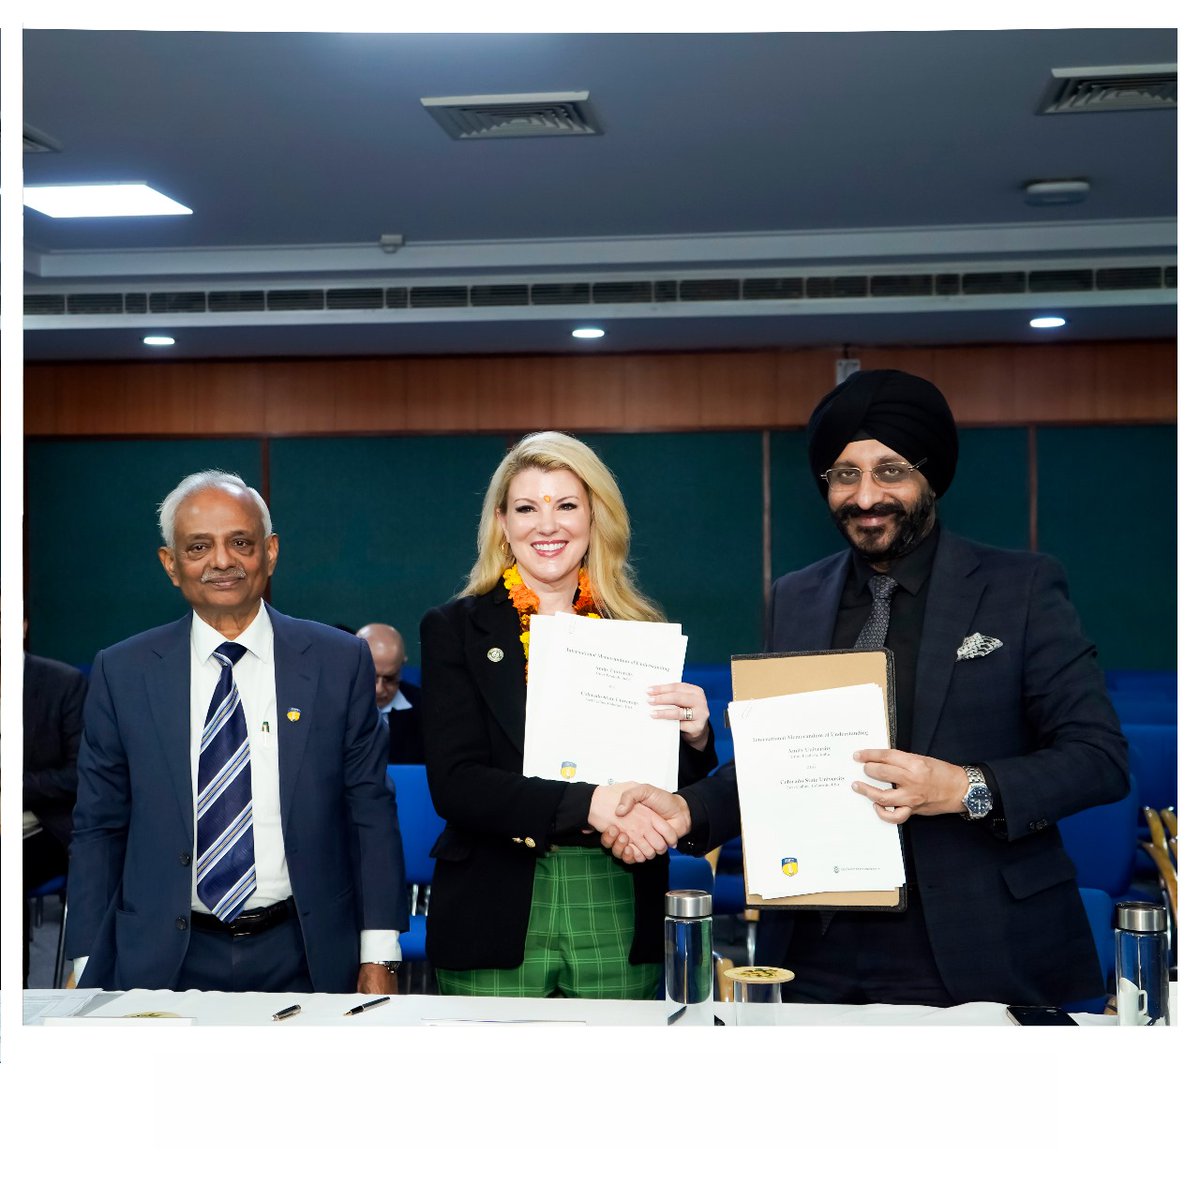 #amityuniversitynoida extends a warm welcome to the high-level delegation from Colorado State University, led by Dr. Amy Parsons, President, Prof. Kathleen Fairfax, Vice Provost for International Affairs, and Prof. Stene Verhulst, Director of International Enrollment Center.